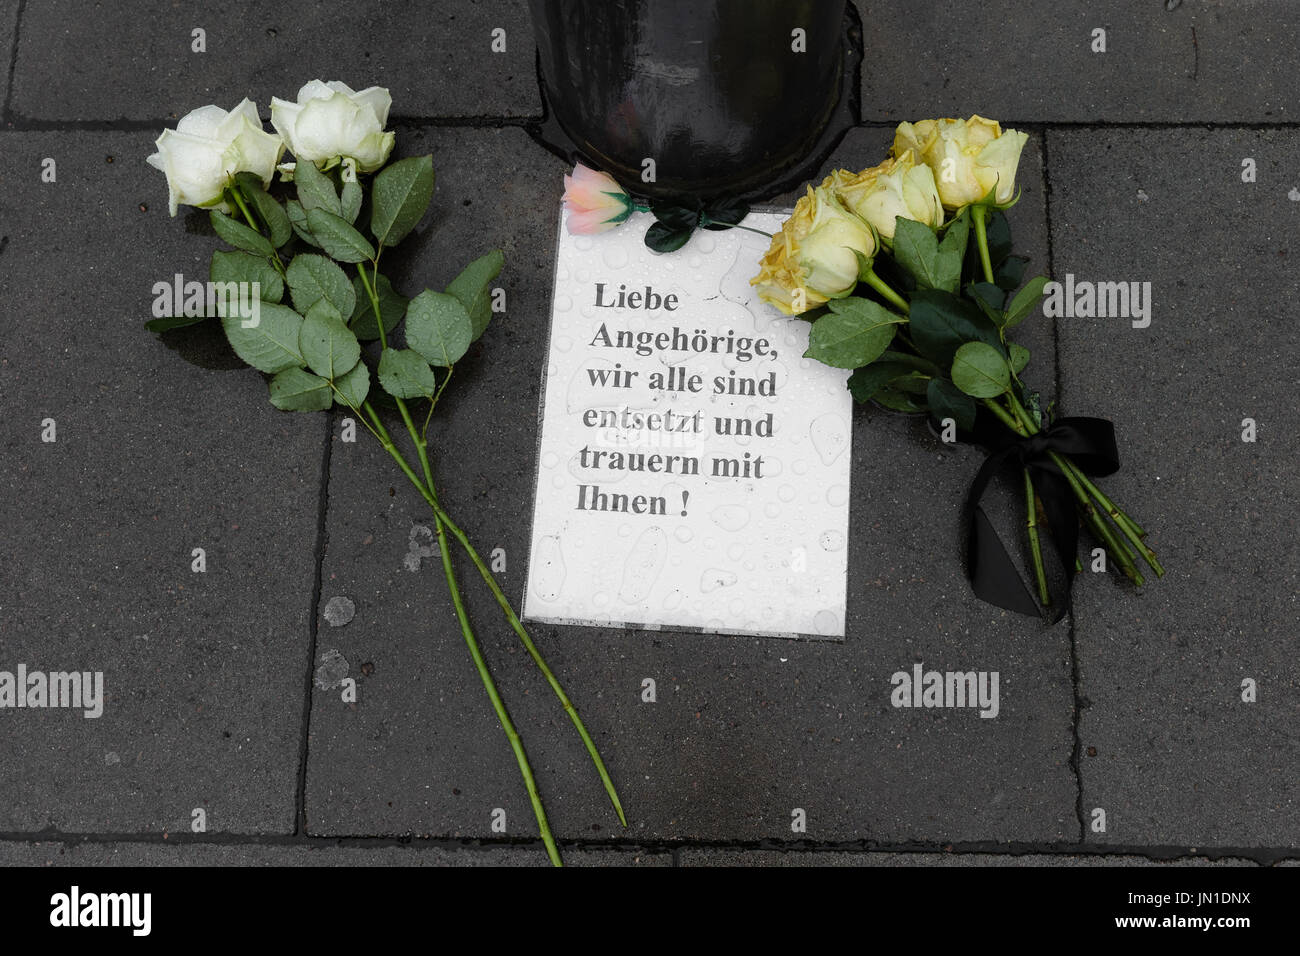 Hamburg, Germany. 29th July, 2017. Roses and an opened letter saying 'Liebe Angehoerige, wir alle sind entsetzt und trauern mit Ihnen!' (lit. Dear relatives: we all are shocked and mourn with you!) lie on the pavement in front of the supermarket where a man killed another person and injured six furhter people in Hamburg, Germany, 29 July 2017. Photo: Markus Scholz/dpa/Alamy Live News Stock Photo